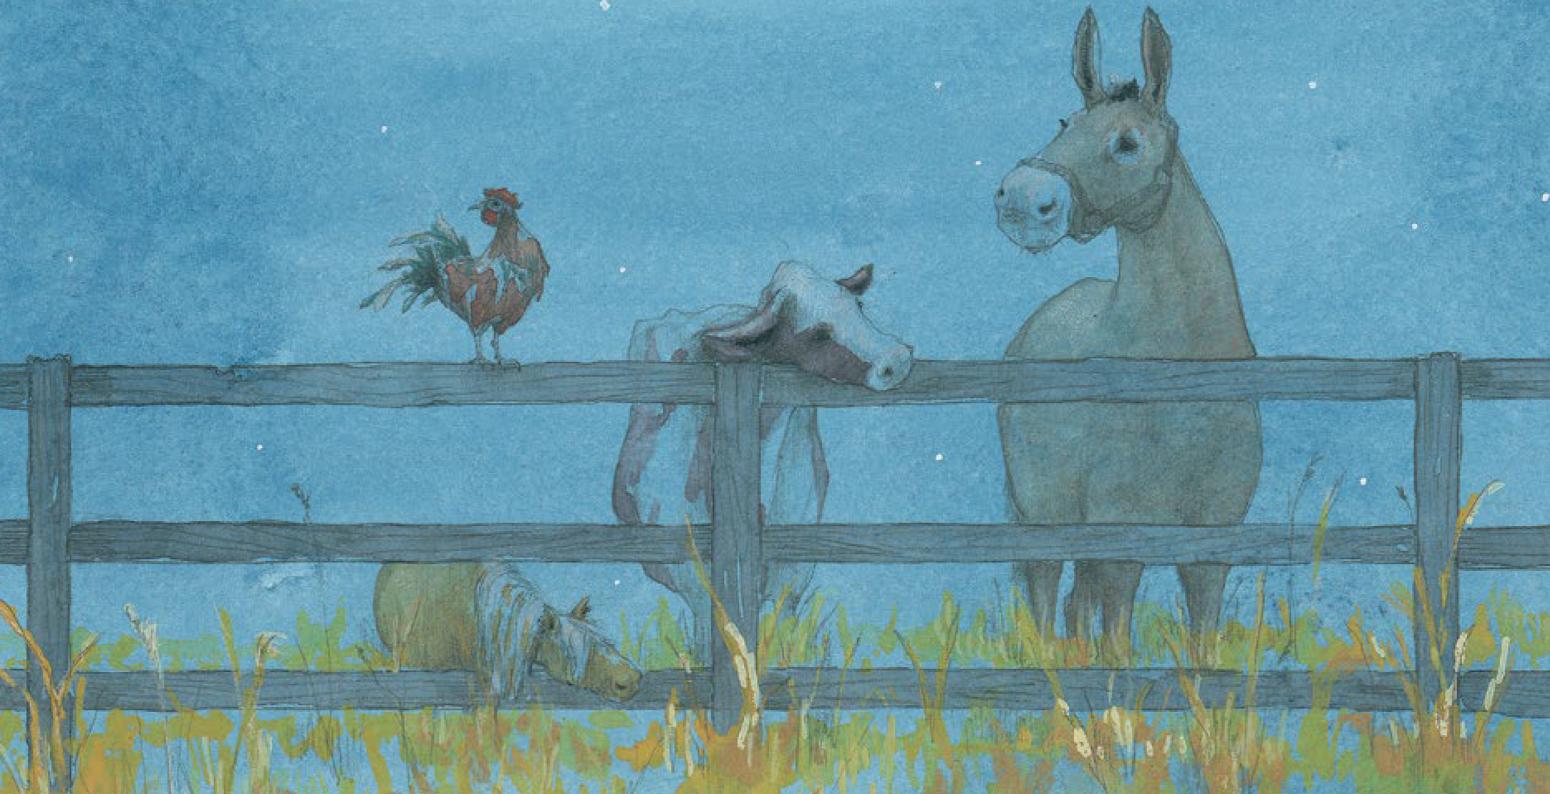 Cover illustration for The Sun is Late and so is the Farmer, showing farm animals at night standing along a fence.